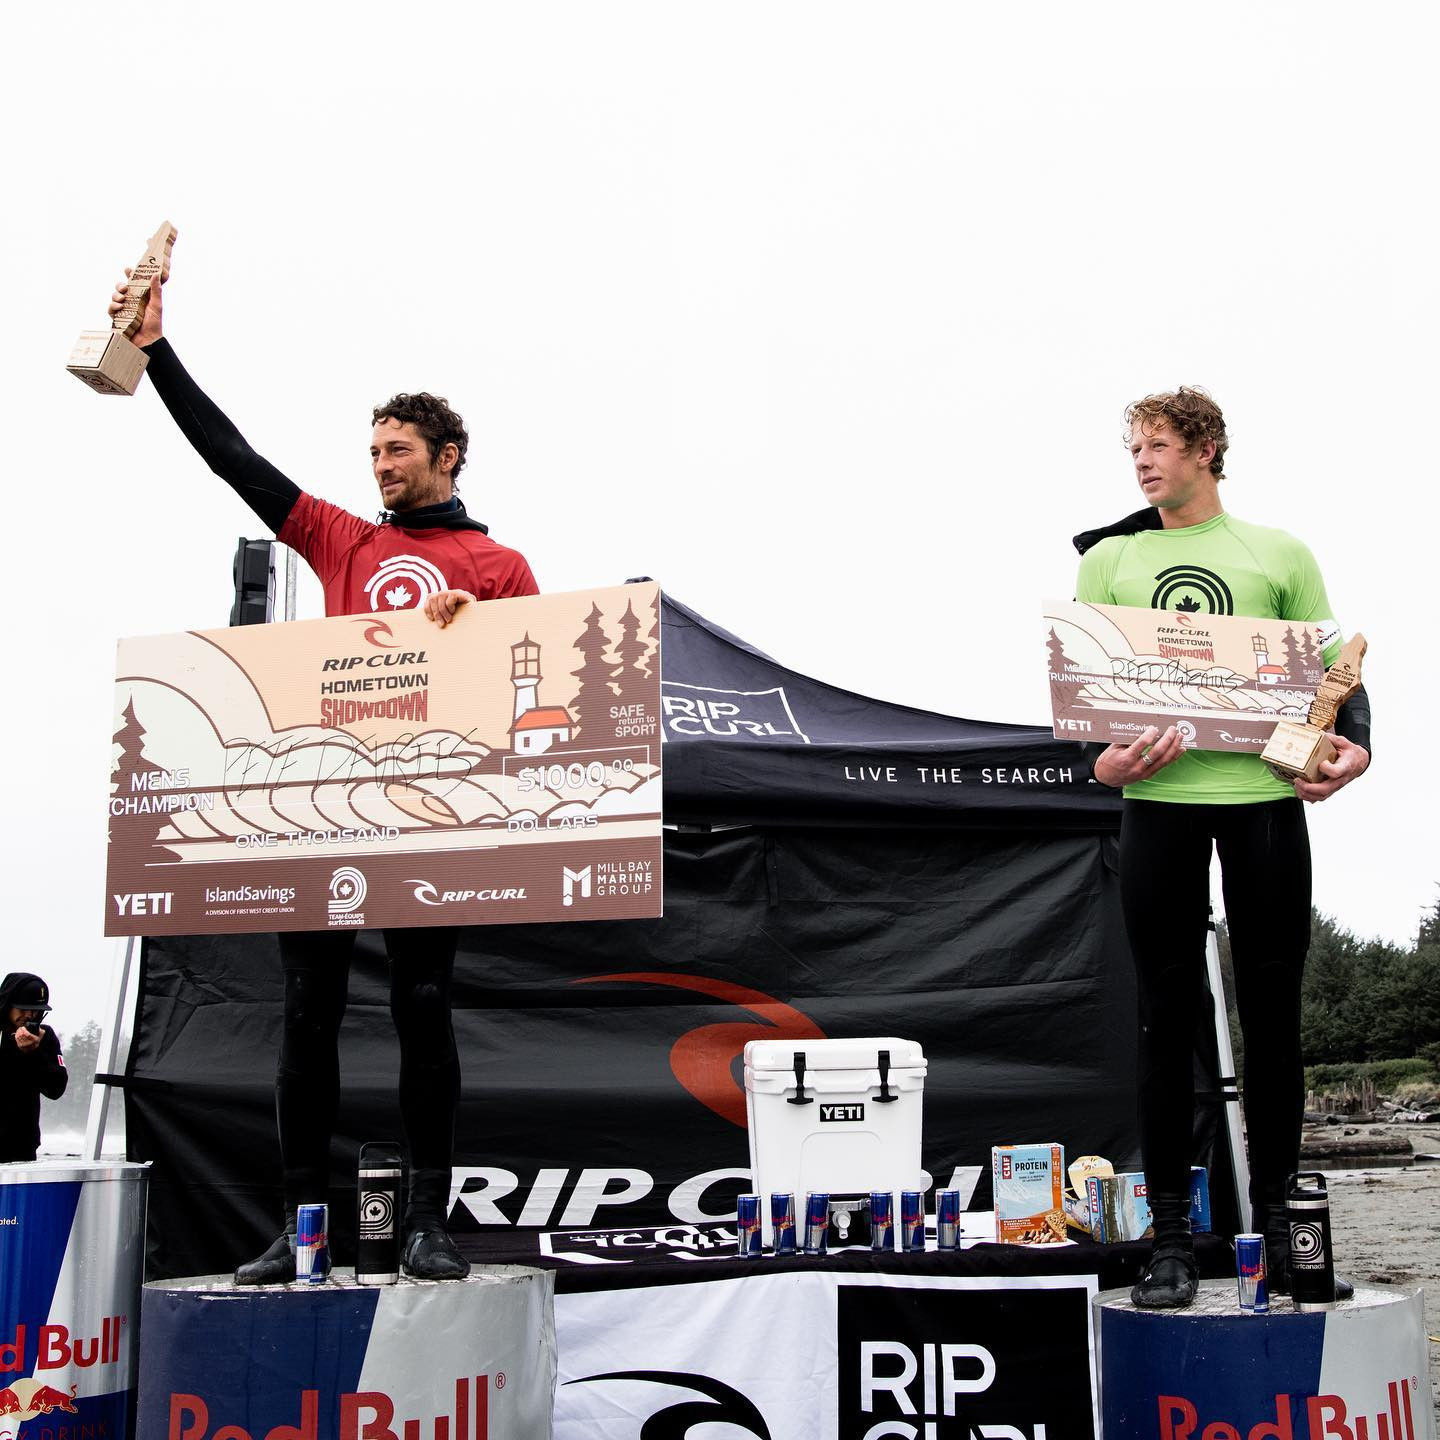 Pete Devries was the victor in the men's competition ©Surf Canada